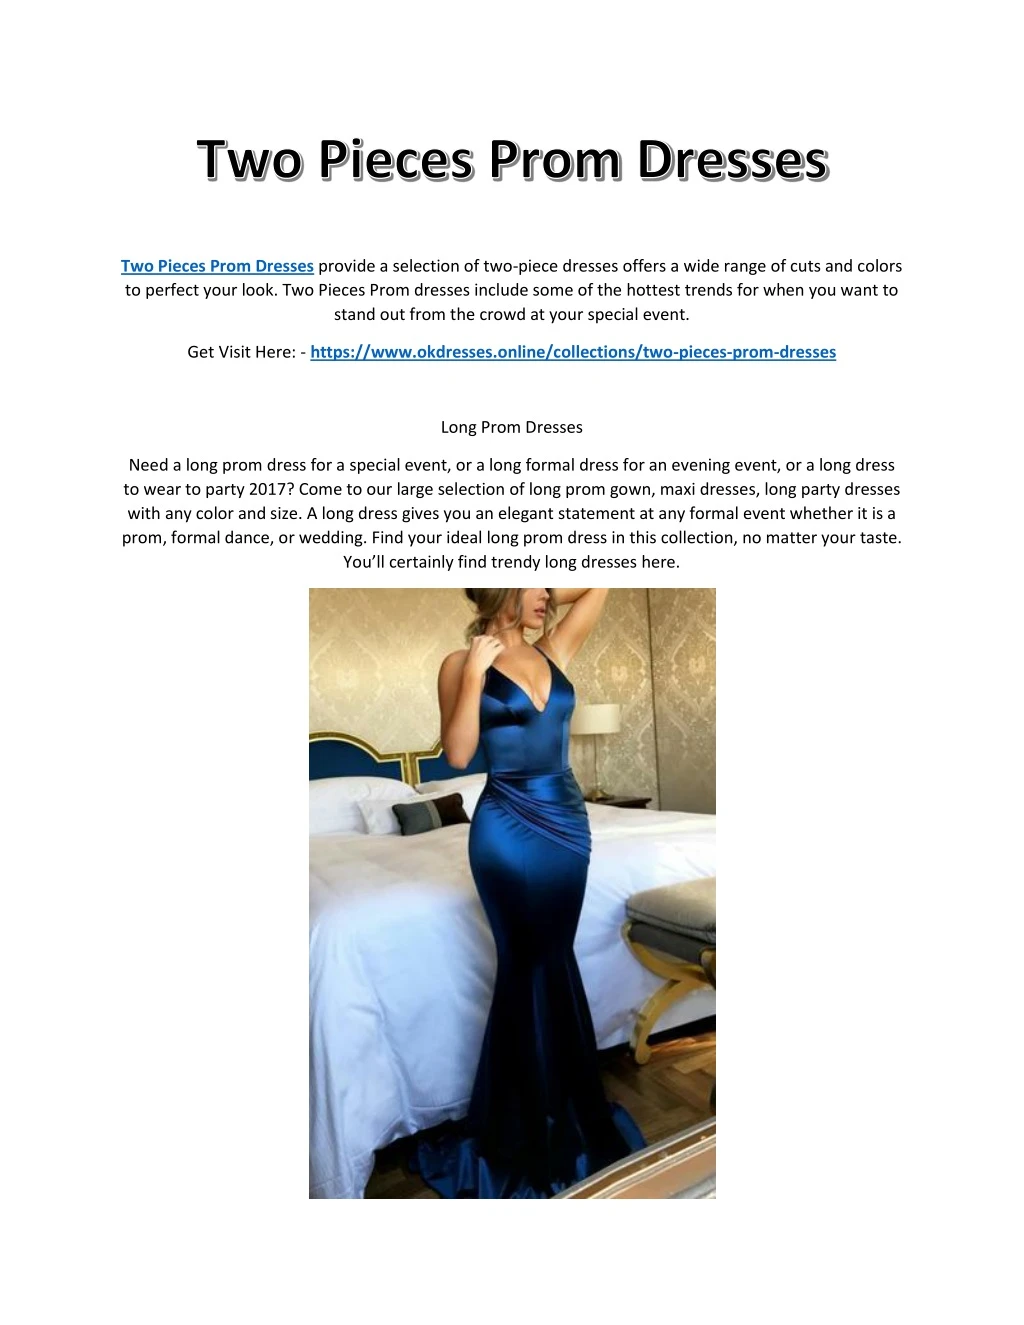 two pieces prom dresses provide a selection